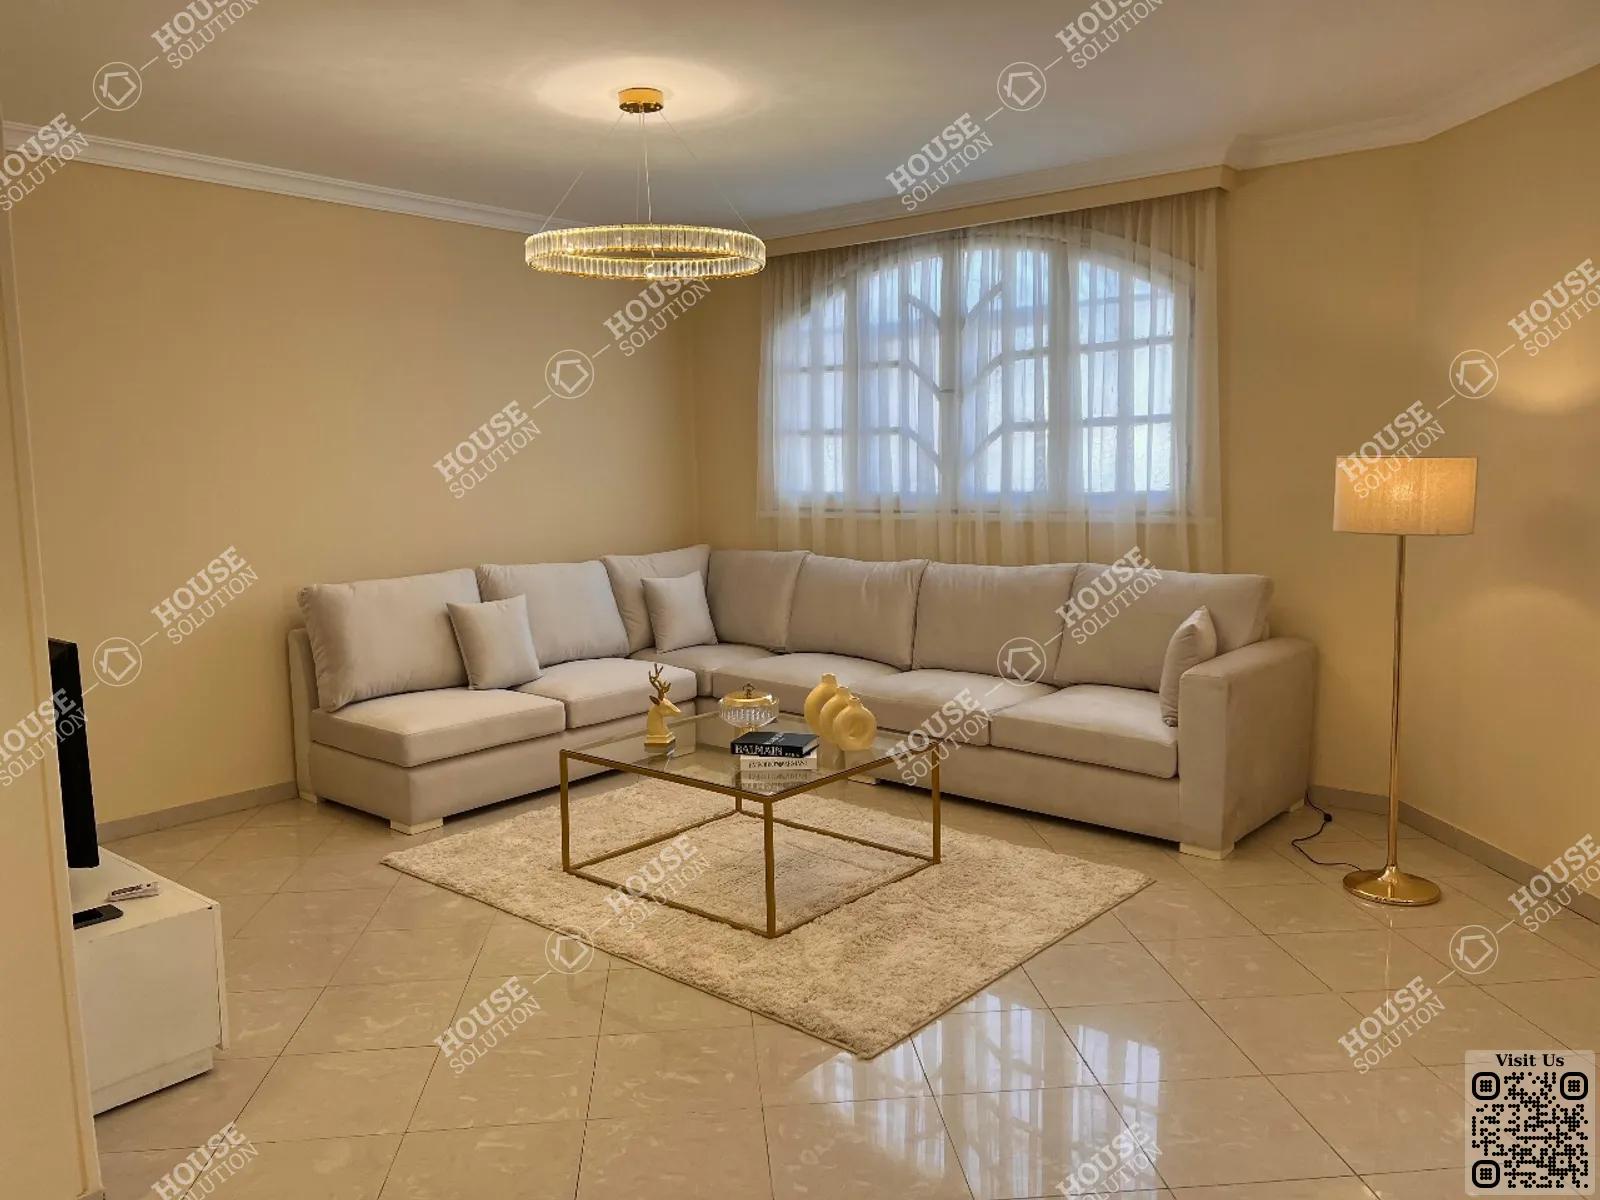 RECEPTION  @ Apartments For Rent In Maadi Maadi Degla Area: 185 m² consists of 3 Bedrooms 2 Bathrooms Modern furnished 5 stars #5880-0